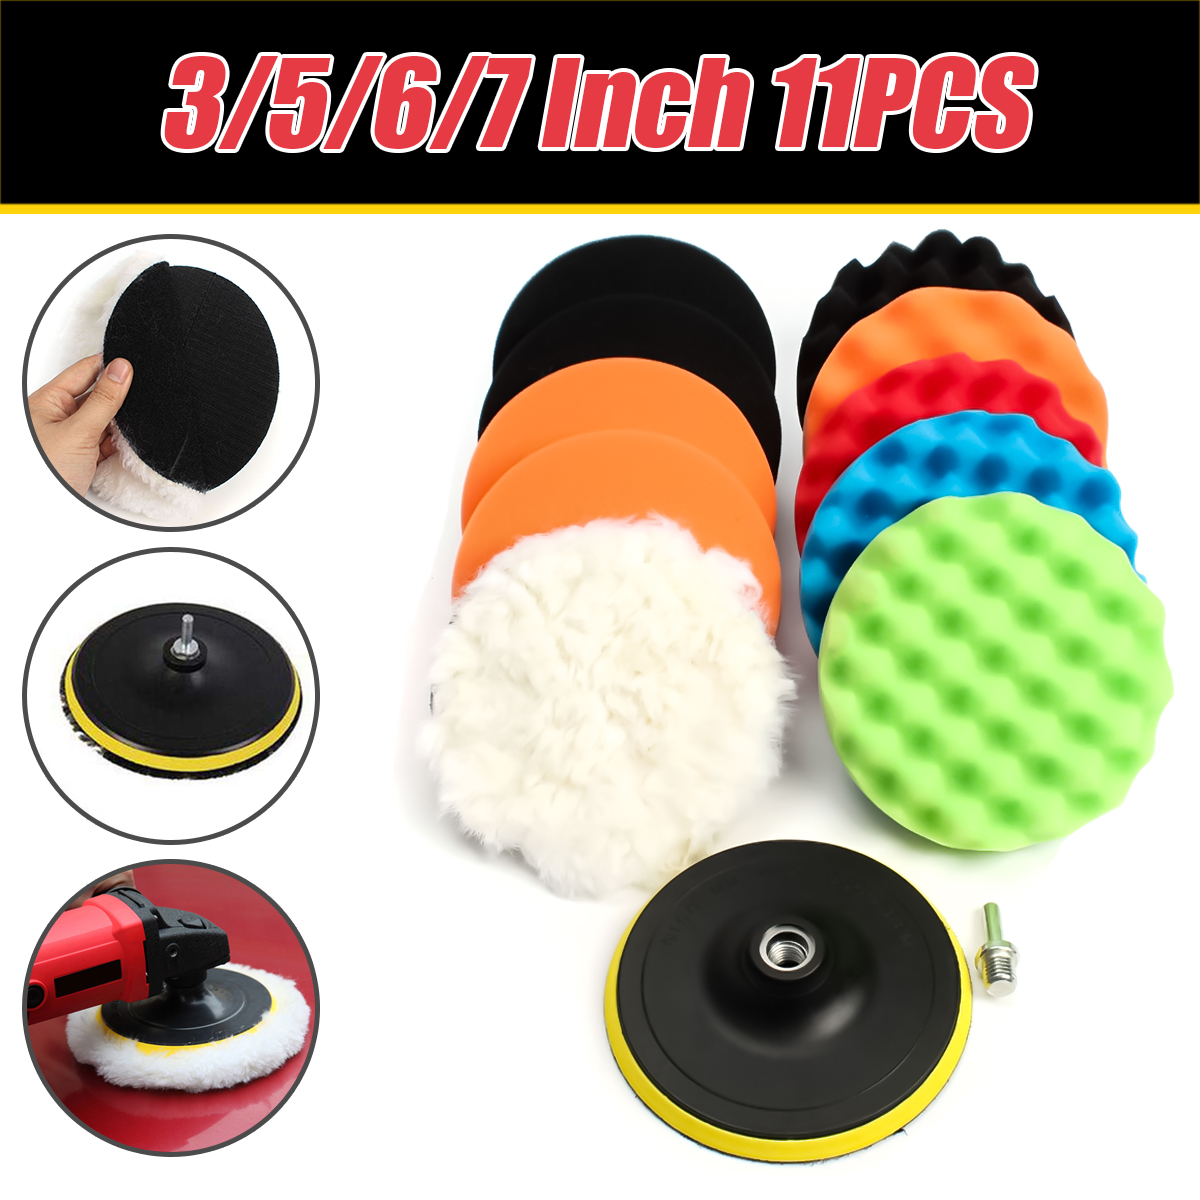 Polishing Waxing Polishing Pad 3 Inch for Car Polisher with Adapter 12Pcs Compound Buffing Sponge Pads Kit 